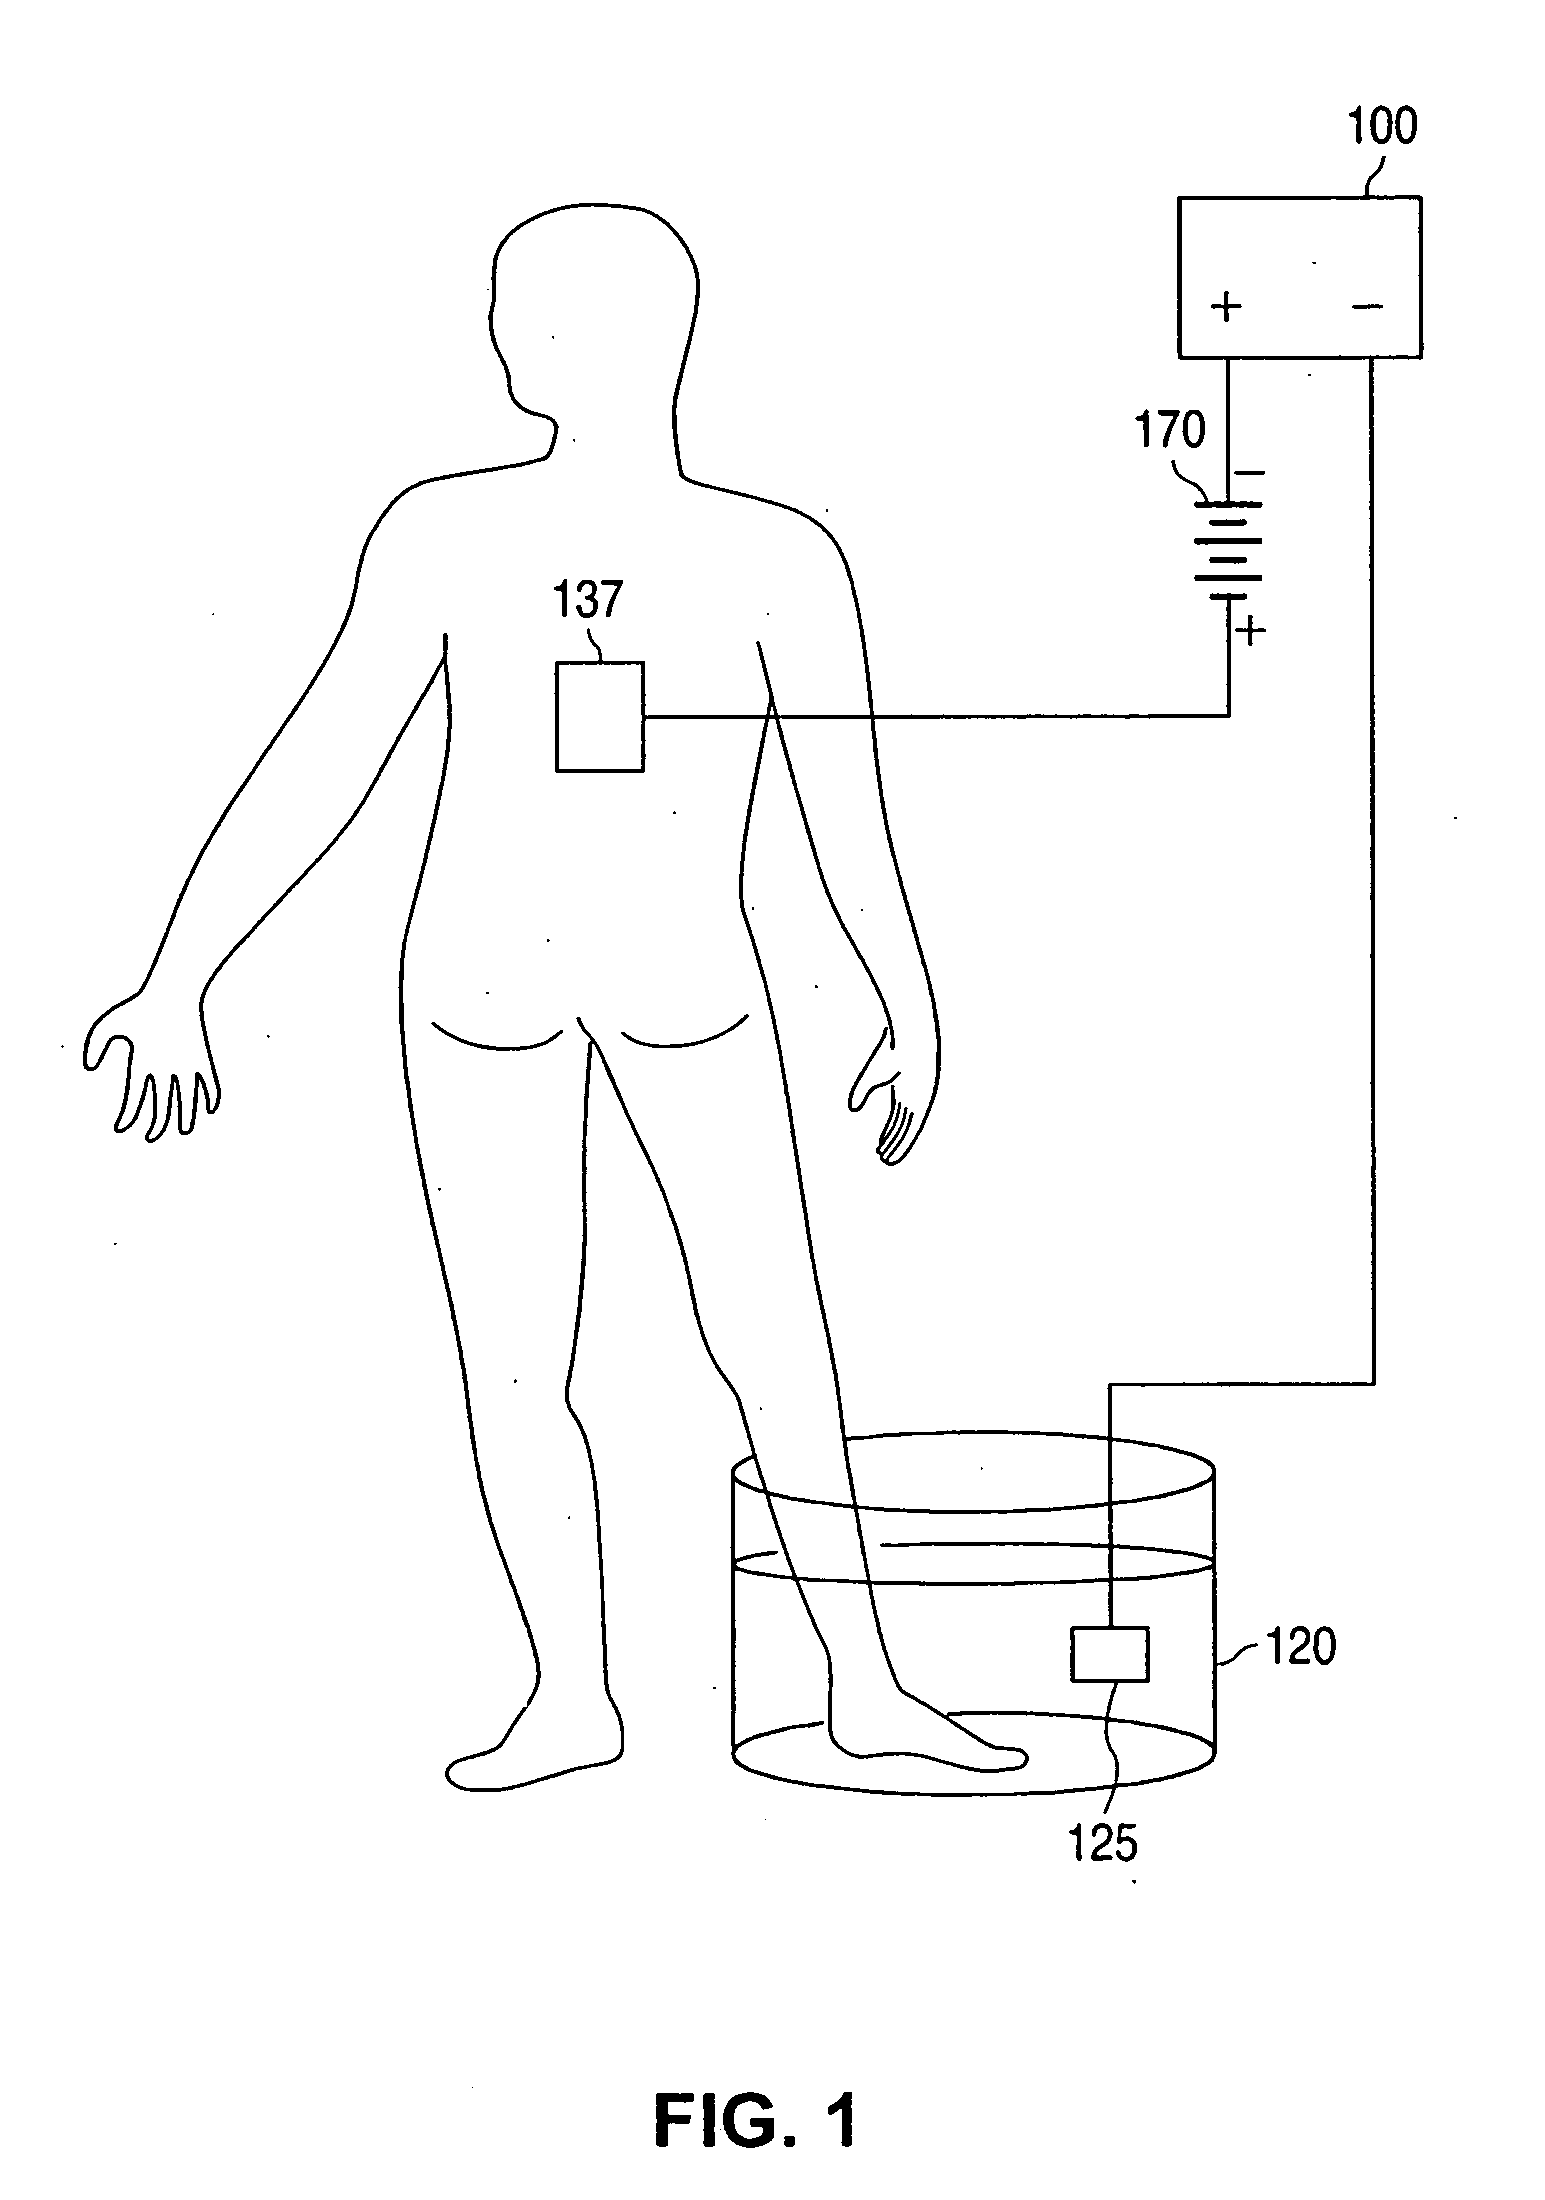 Method and device for electrochemical rejuvenation of skin and underlying tissue, and muscle building